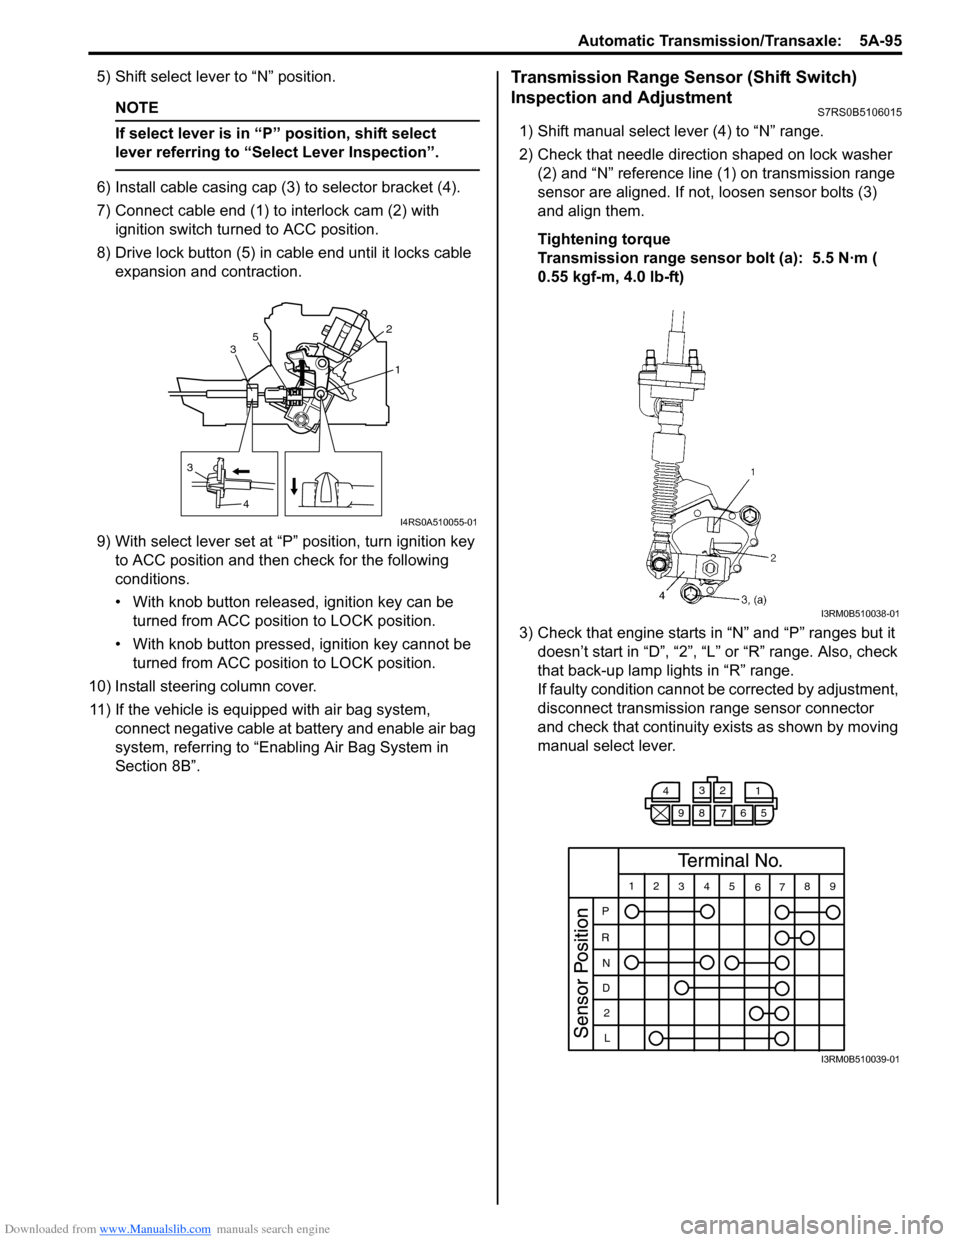 SUZUKI SWIFT 2006 2.G Service Workshop Manual Downloaded from www.Manualslib.com manuals search engine Automatic Transmission/Transaxle:  5A-95
5) Shift select lever to “N” position.
NOTE
If select lever is in “P” position, shift select 
